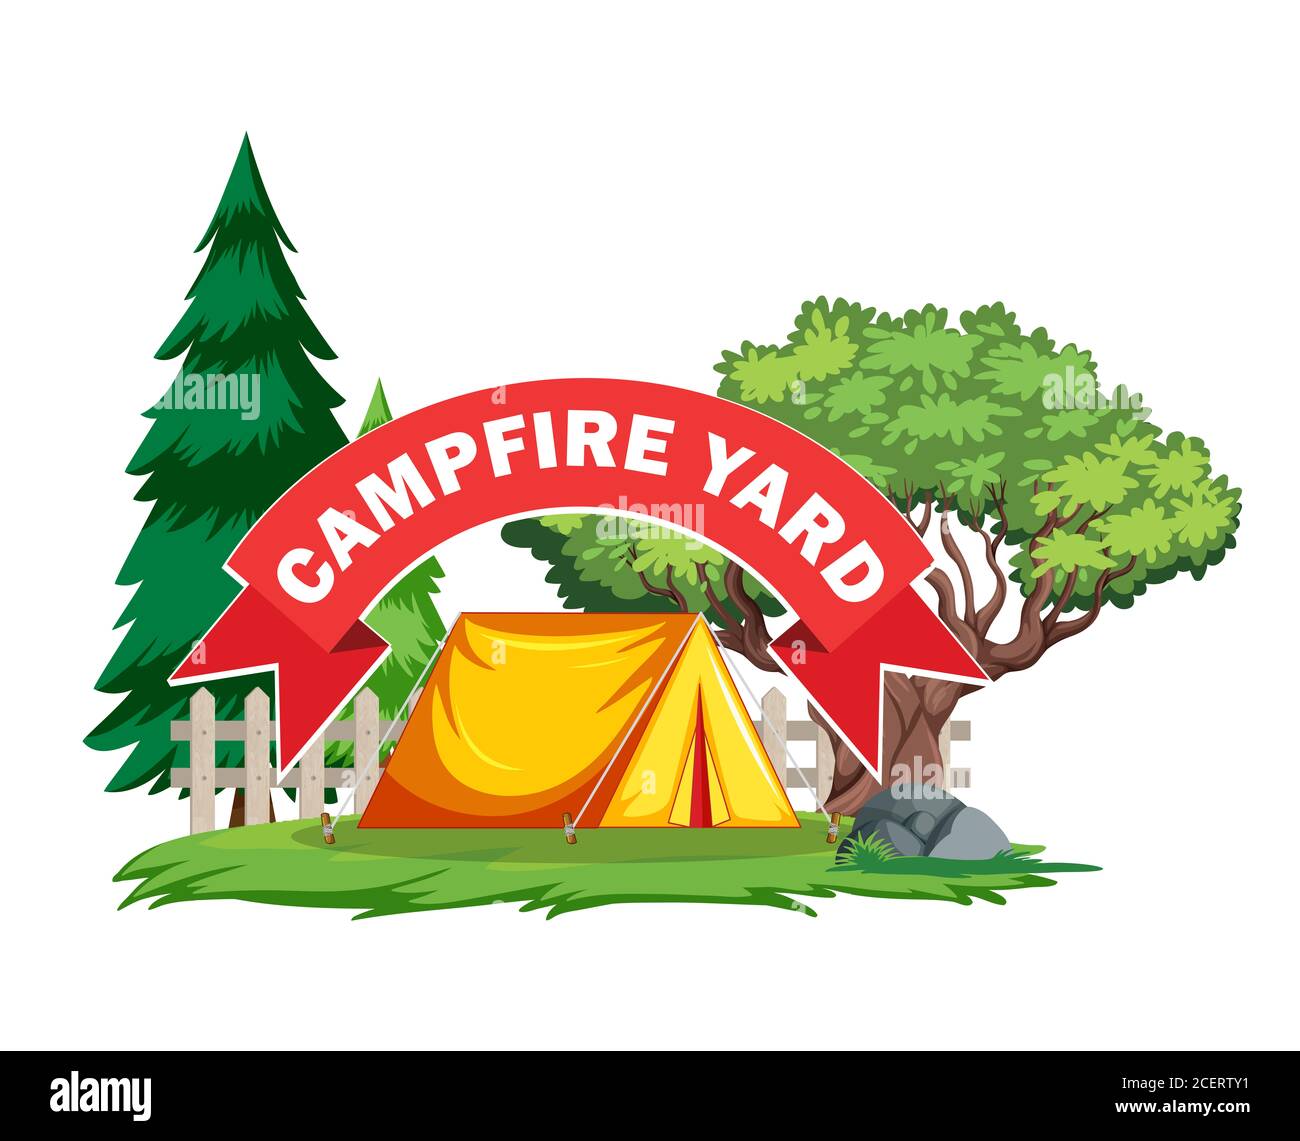 A vector illustration of a yard with a campfire tend with tree and pine tree outside the fence Stock Photo